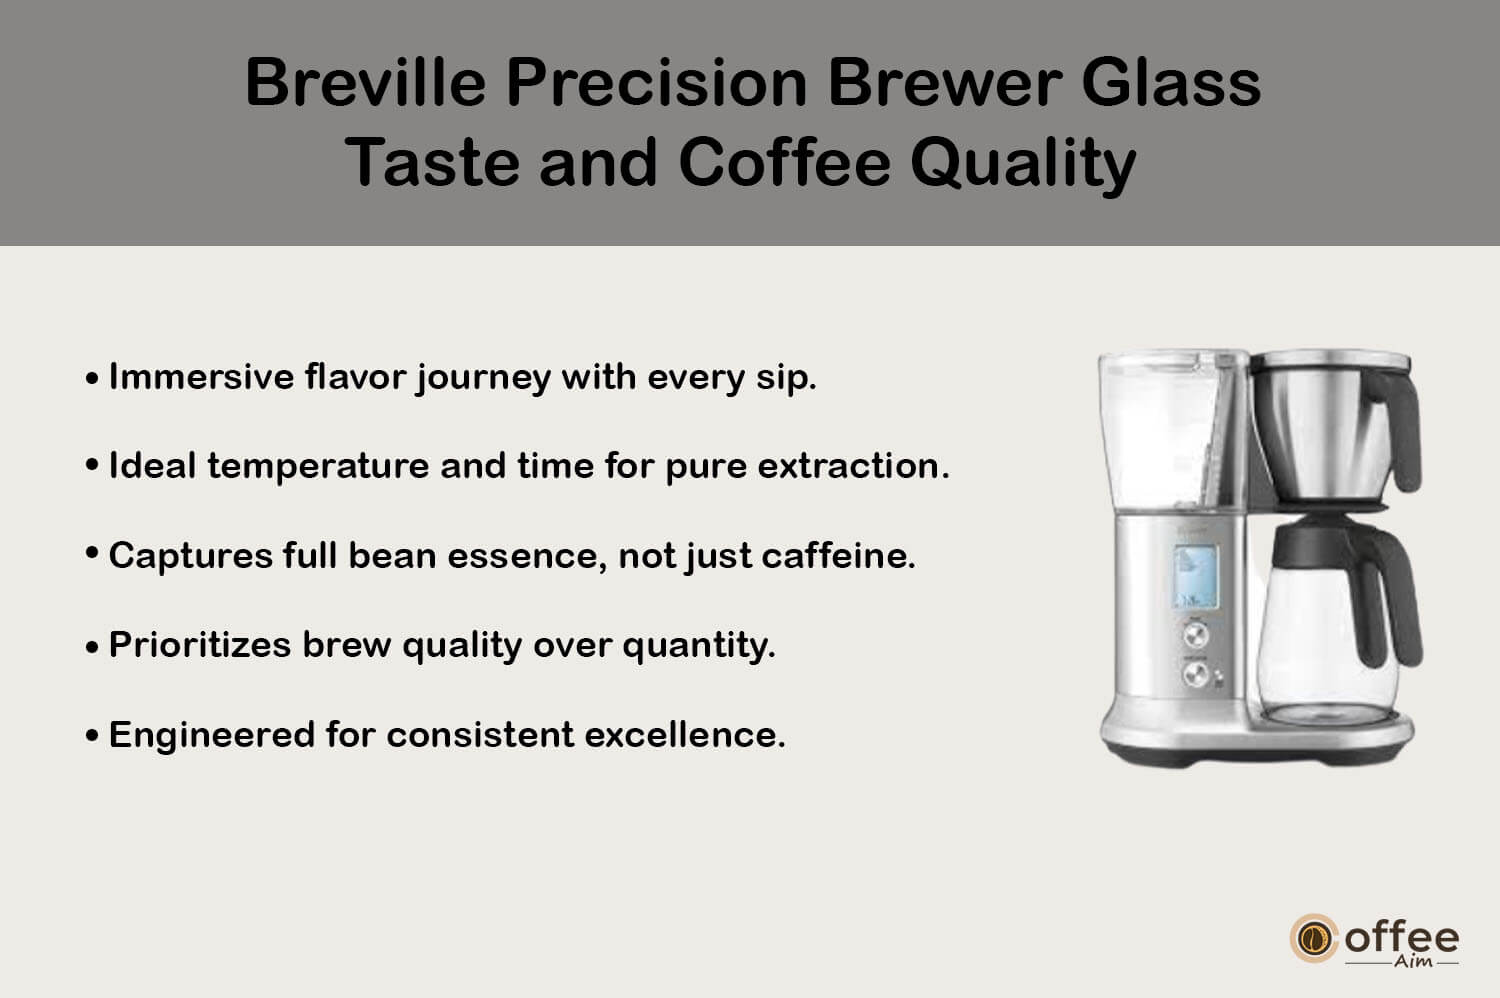 This image illustrates the taste and coffee quality of the 'Breville Precision Brewer Glass' for our article titled 'Breville Precision Brewer Glass Review'.